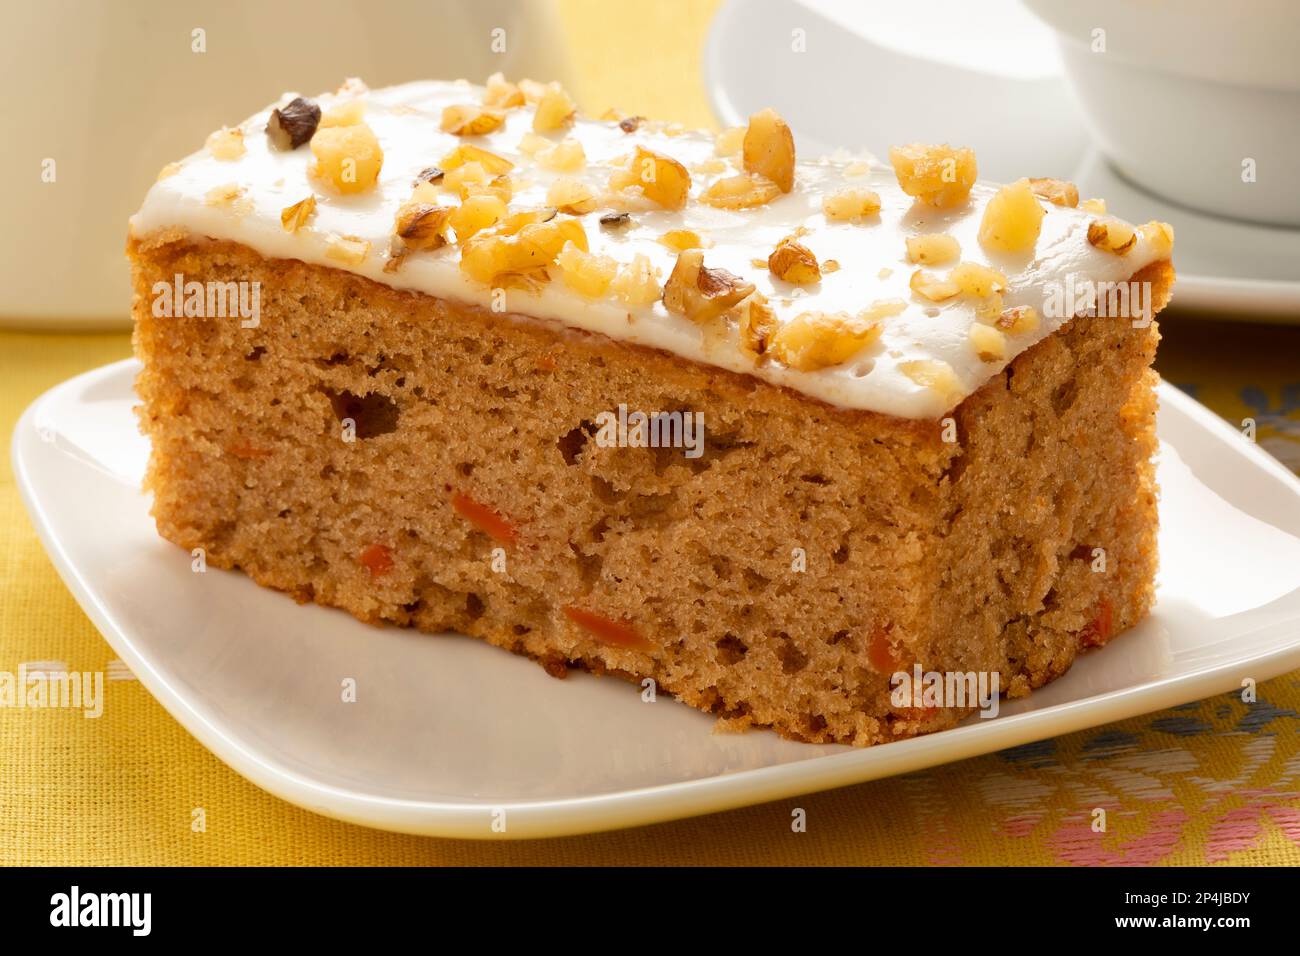 Piece of homemade carrot cake on a plate close up Stock Photo